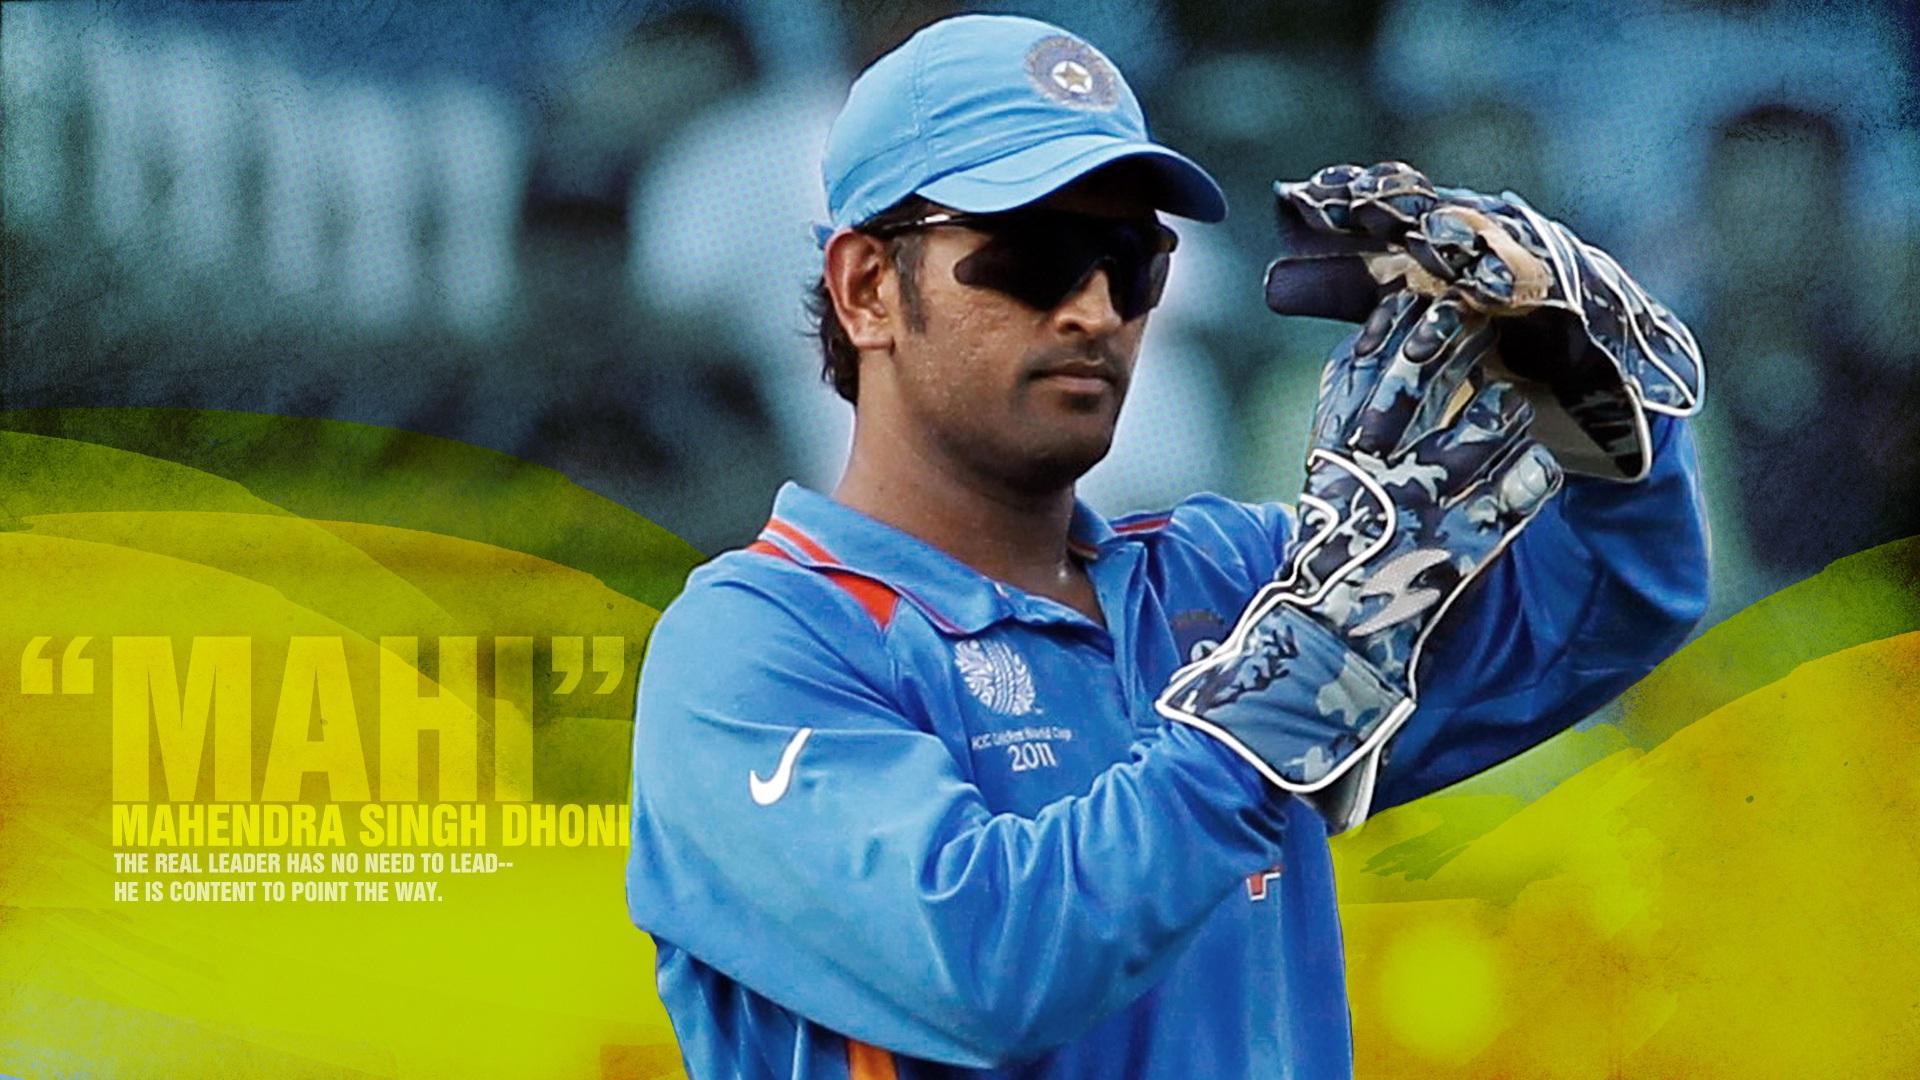 Ms Dhoni HD Photo Csk Download The Galleries of HD Wallpaper